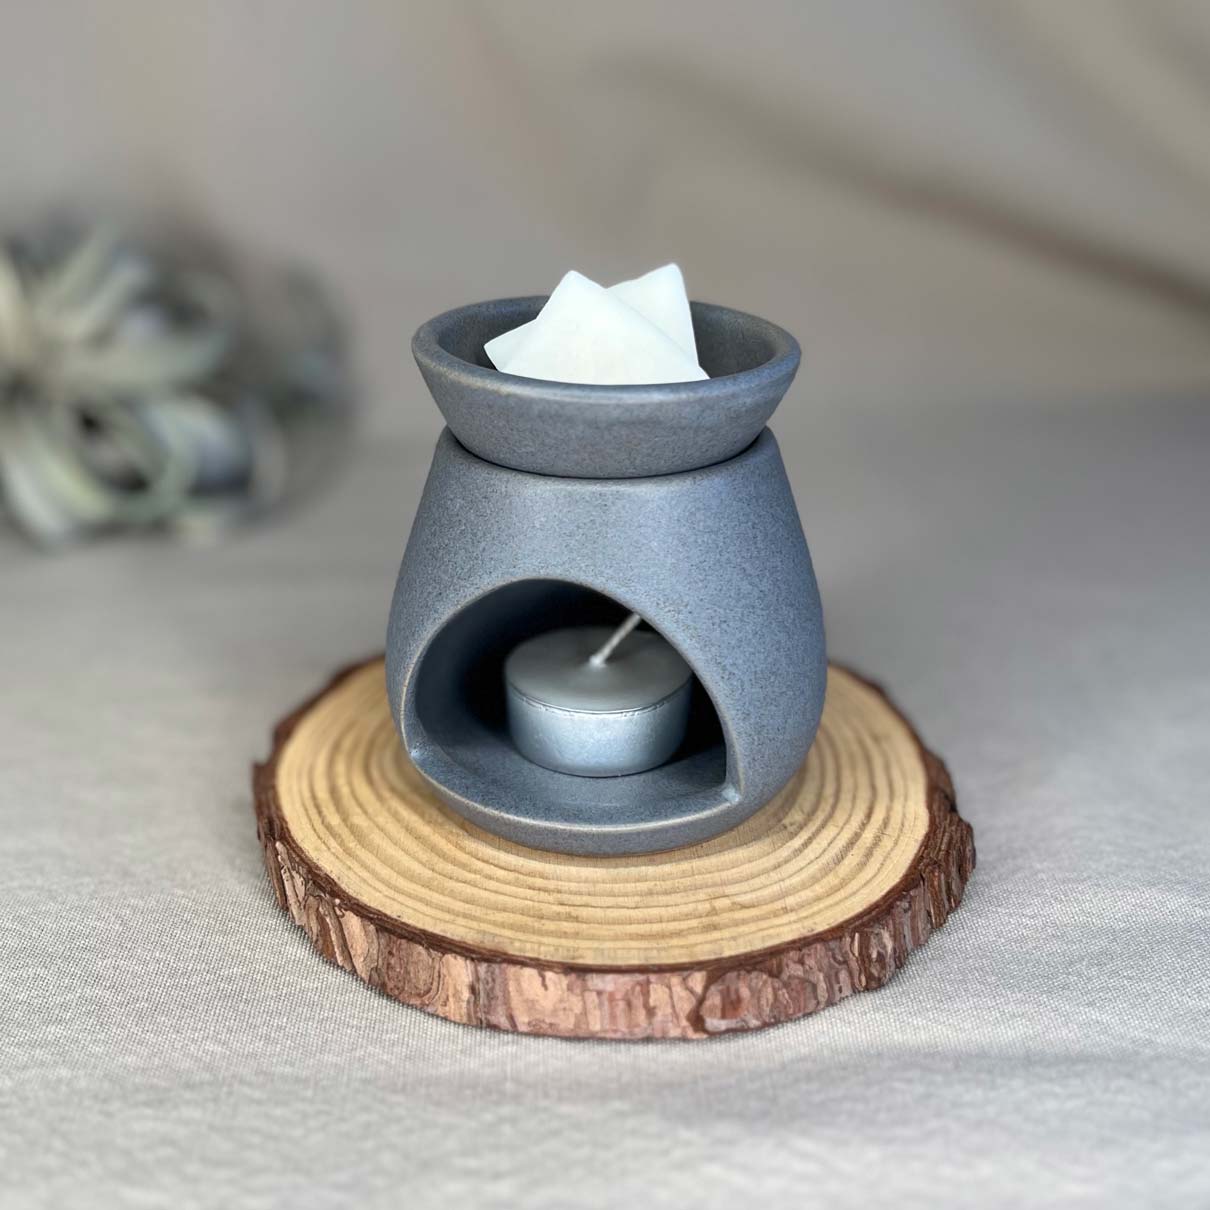 Fern x Flow handmade stoneware essential oil and wax melt warmer in slate gray on a rustic wooden riser with a large air plant in the background.